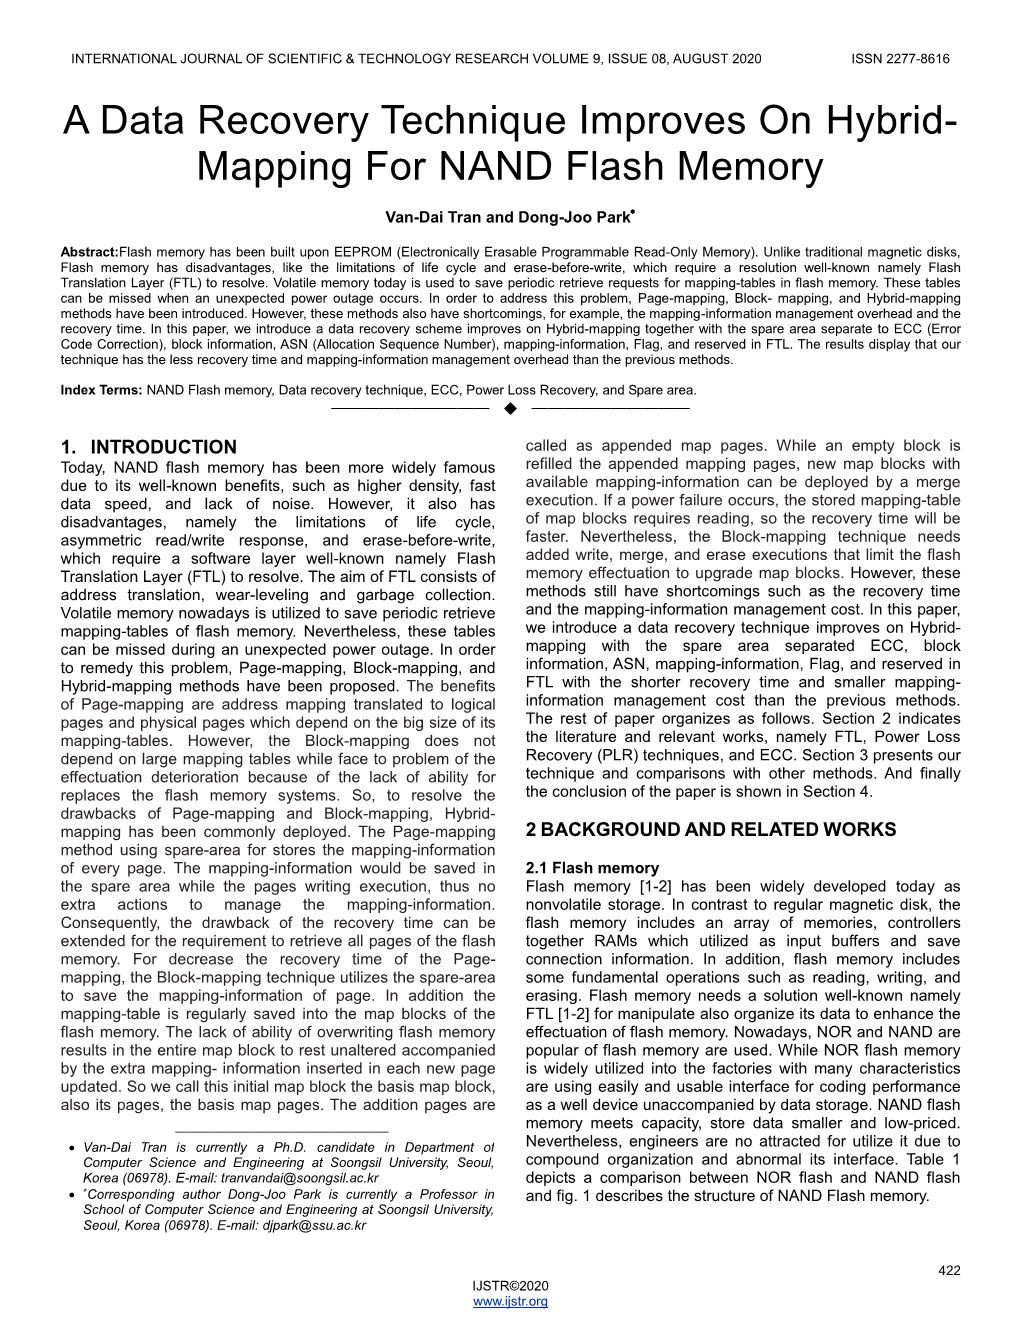 A Data Recovery Technique Improves on Hybrid- Mapping for NAND Flash Memory